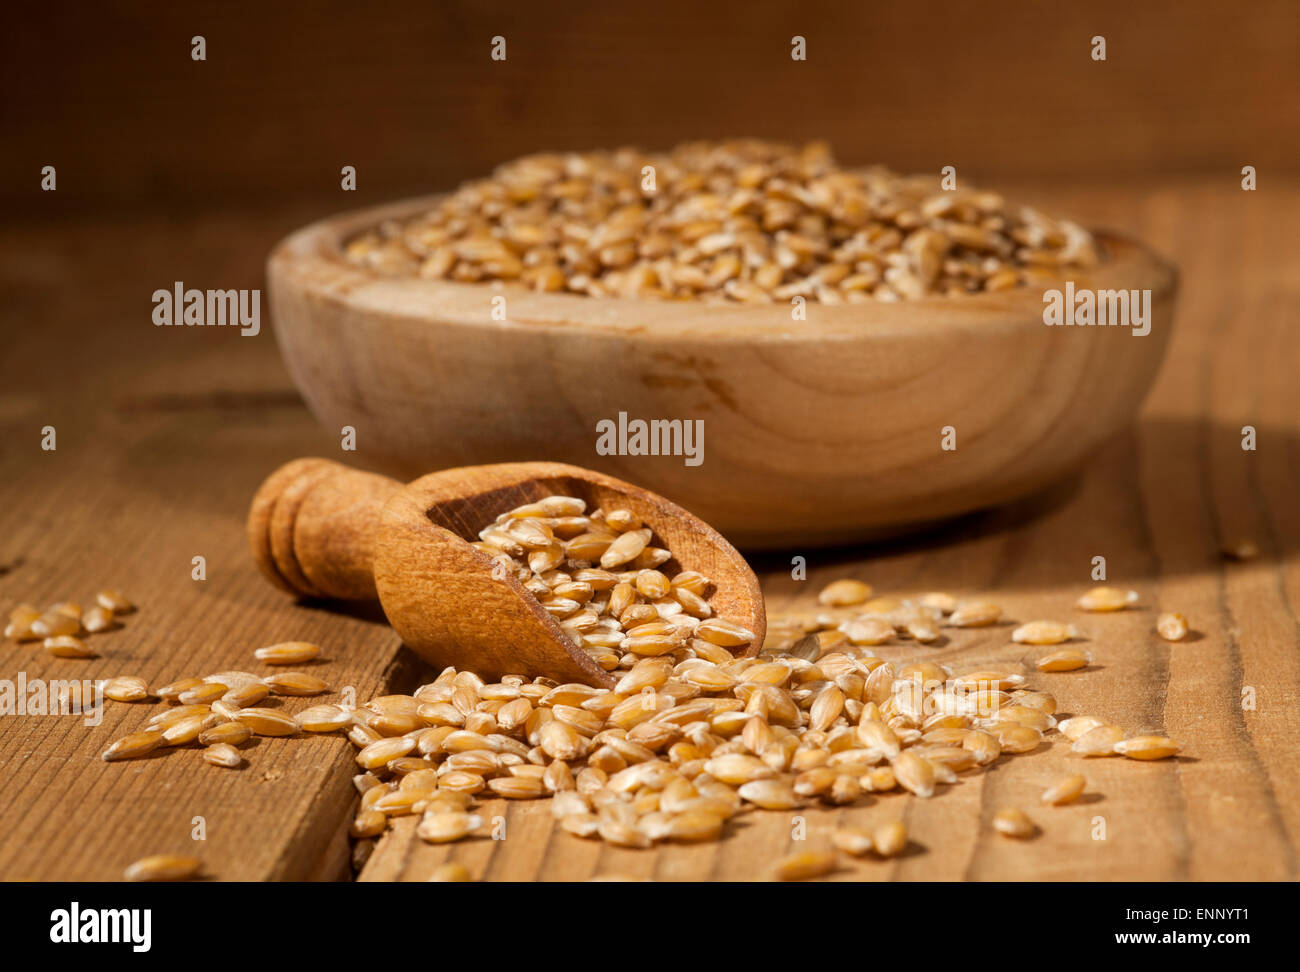 Spelt in a wooden bowl and spoon on a wooden background. Stock Photo